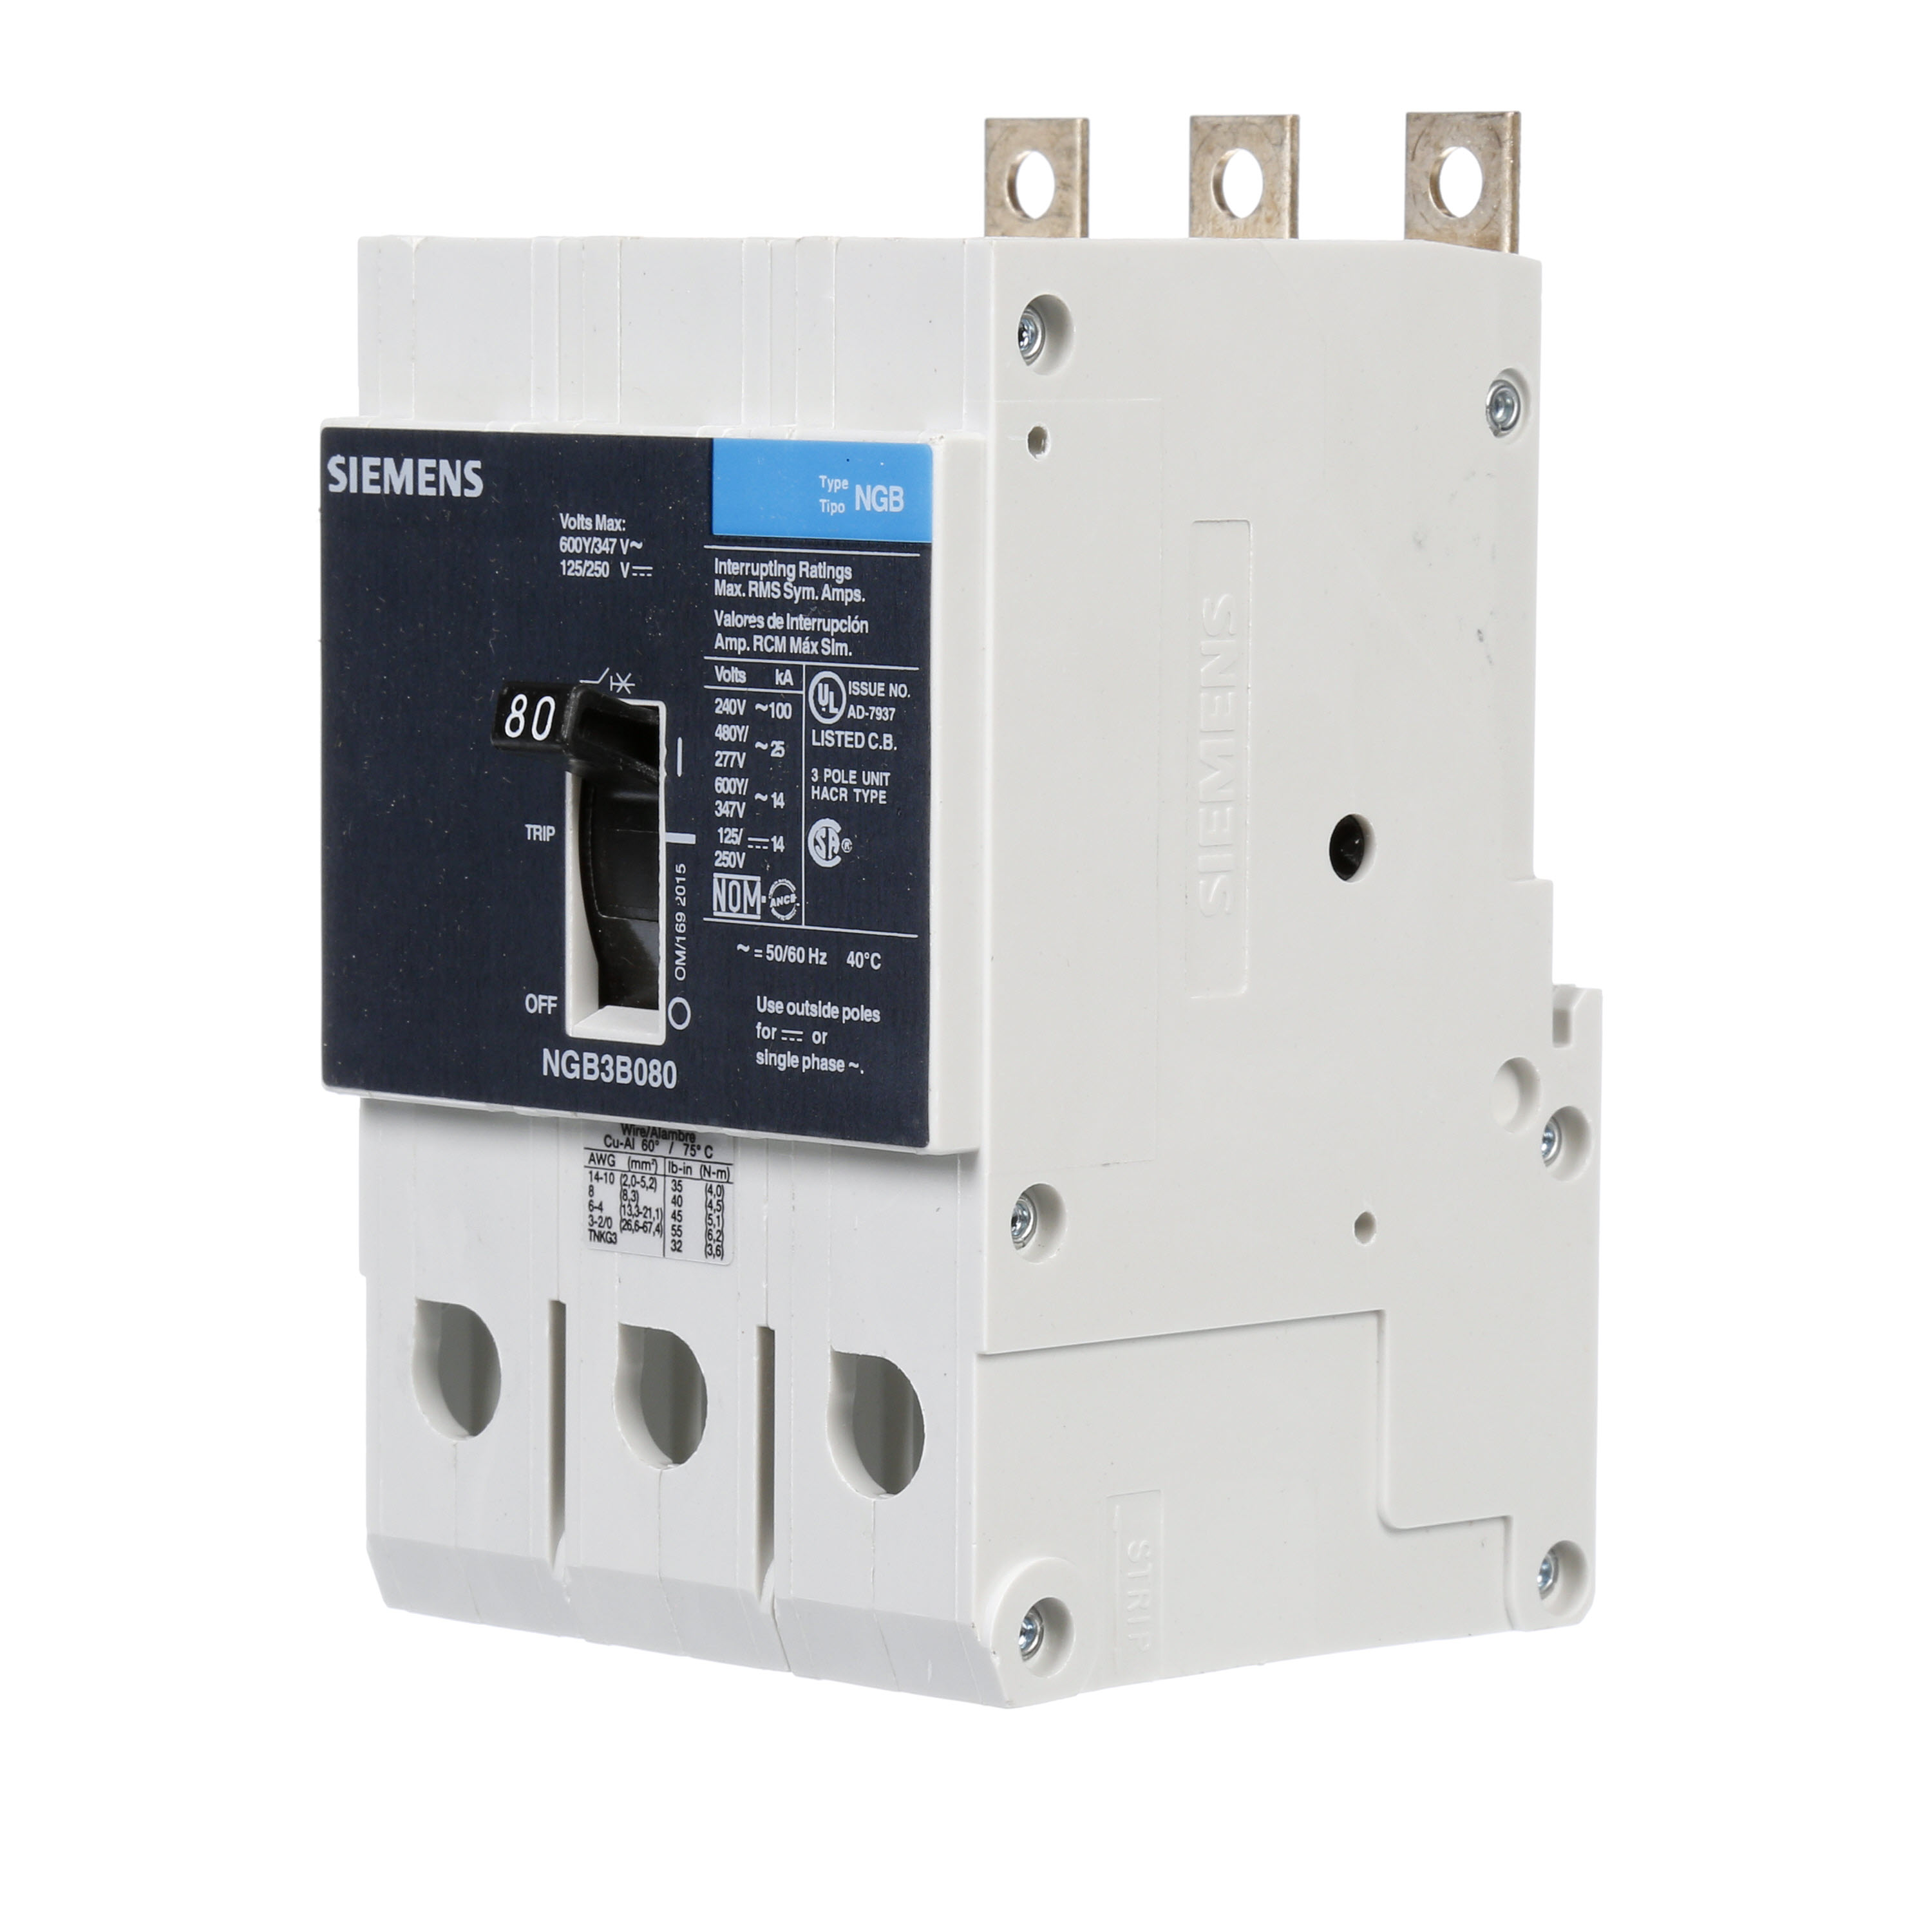 SIEMENS LOW VOLTAGE PANELBOARD MOUNT G FRAME CIRCUIT BREAKER WITH THERMAL - MAGNETIC TRIP. UL LISTED NGB FRAME WITH STANDARD BREAKING CAPACITY. 80A 3-POLE (14KAIC AT 600Y/347V) (25KAIC AT 480Y/277V). SPECIAL FEATURES MOUNTS ON PANELBOARD, LOAD SIDE LUGS ONLY (TC1GG20) WIRE RANGE 8 - 1/0 AWS (CU/AL). DIMENSIONS (W x H x D) IN 3 x 5.4 x 2.8.